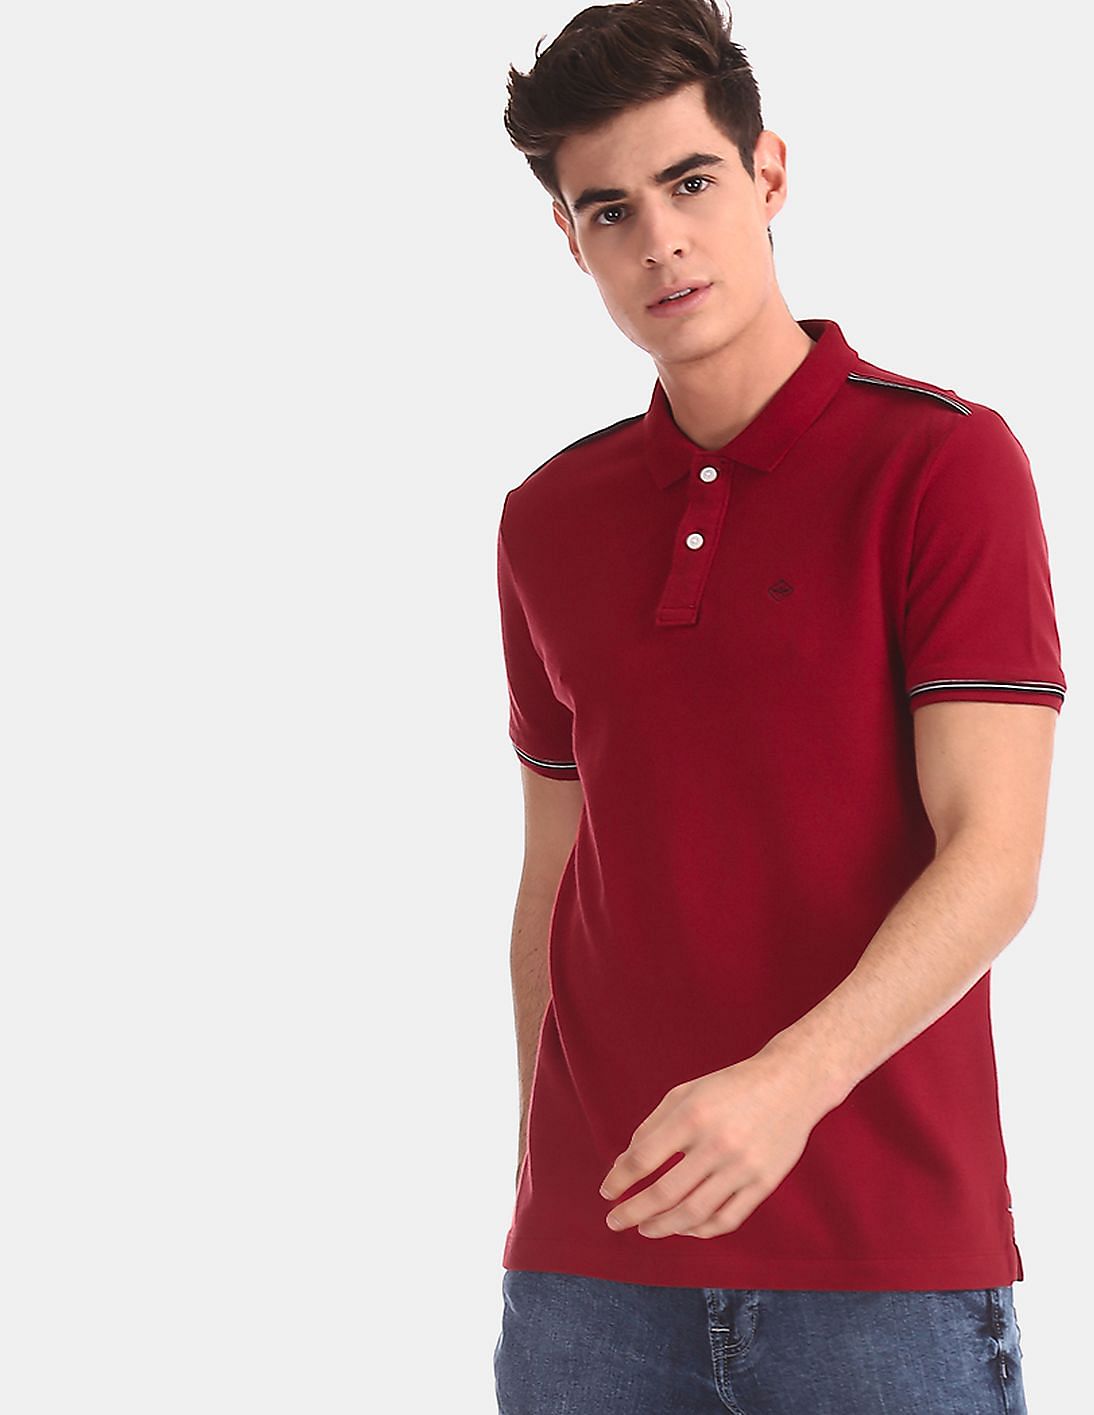 Buy Arrow Sports Red Solid Compact Cotton Polo Shirt - NNNOW.com